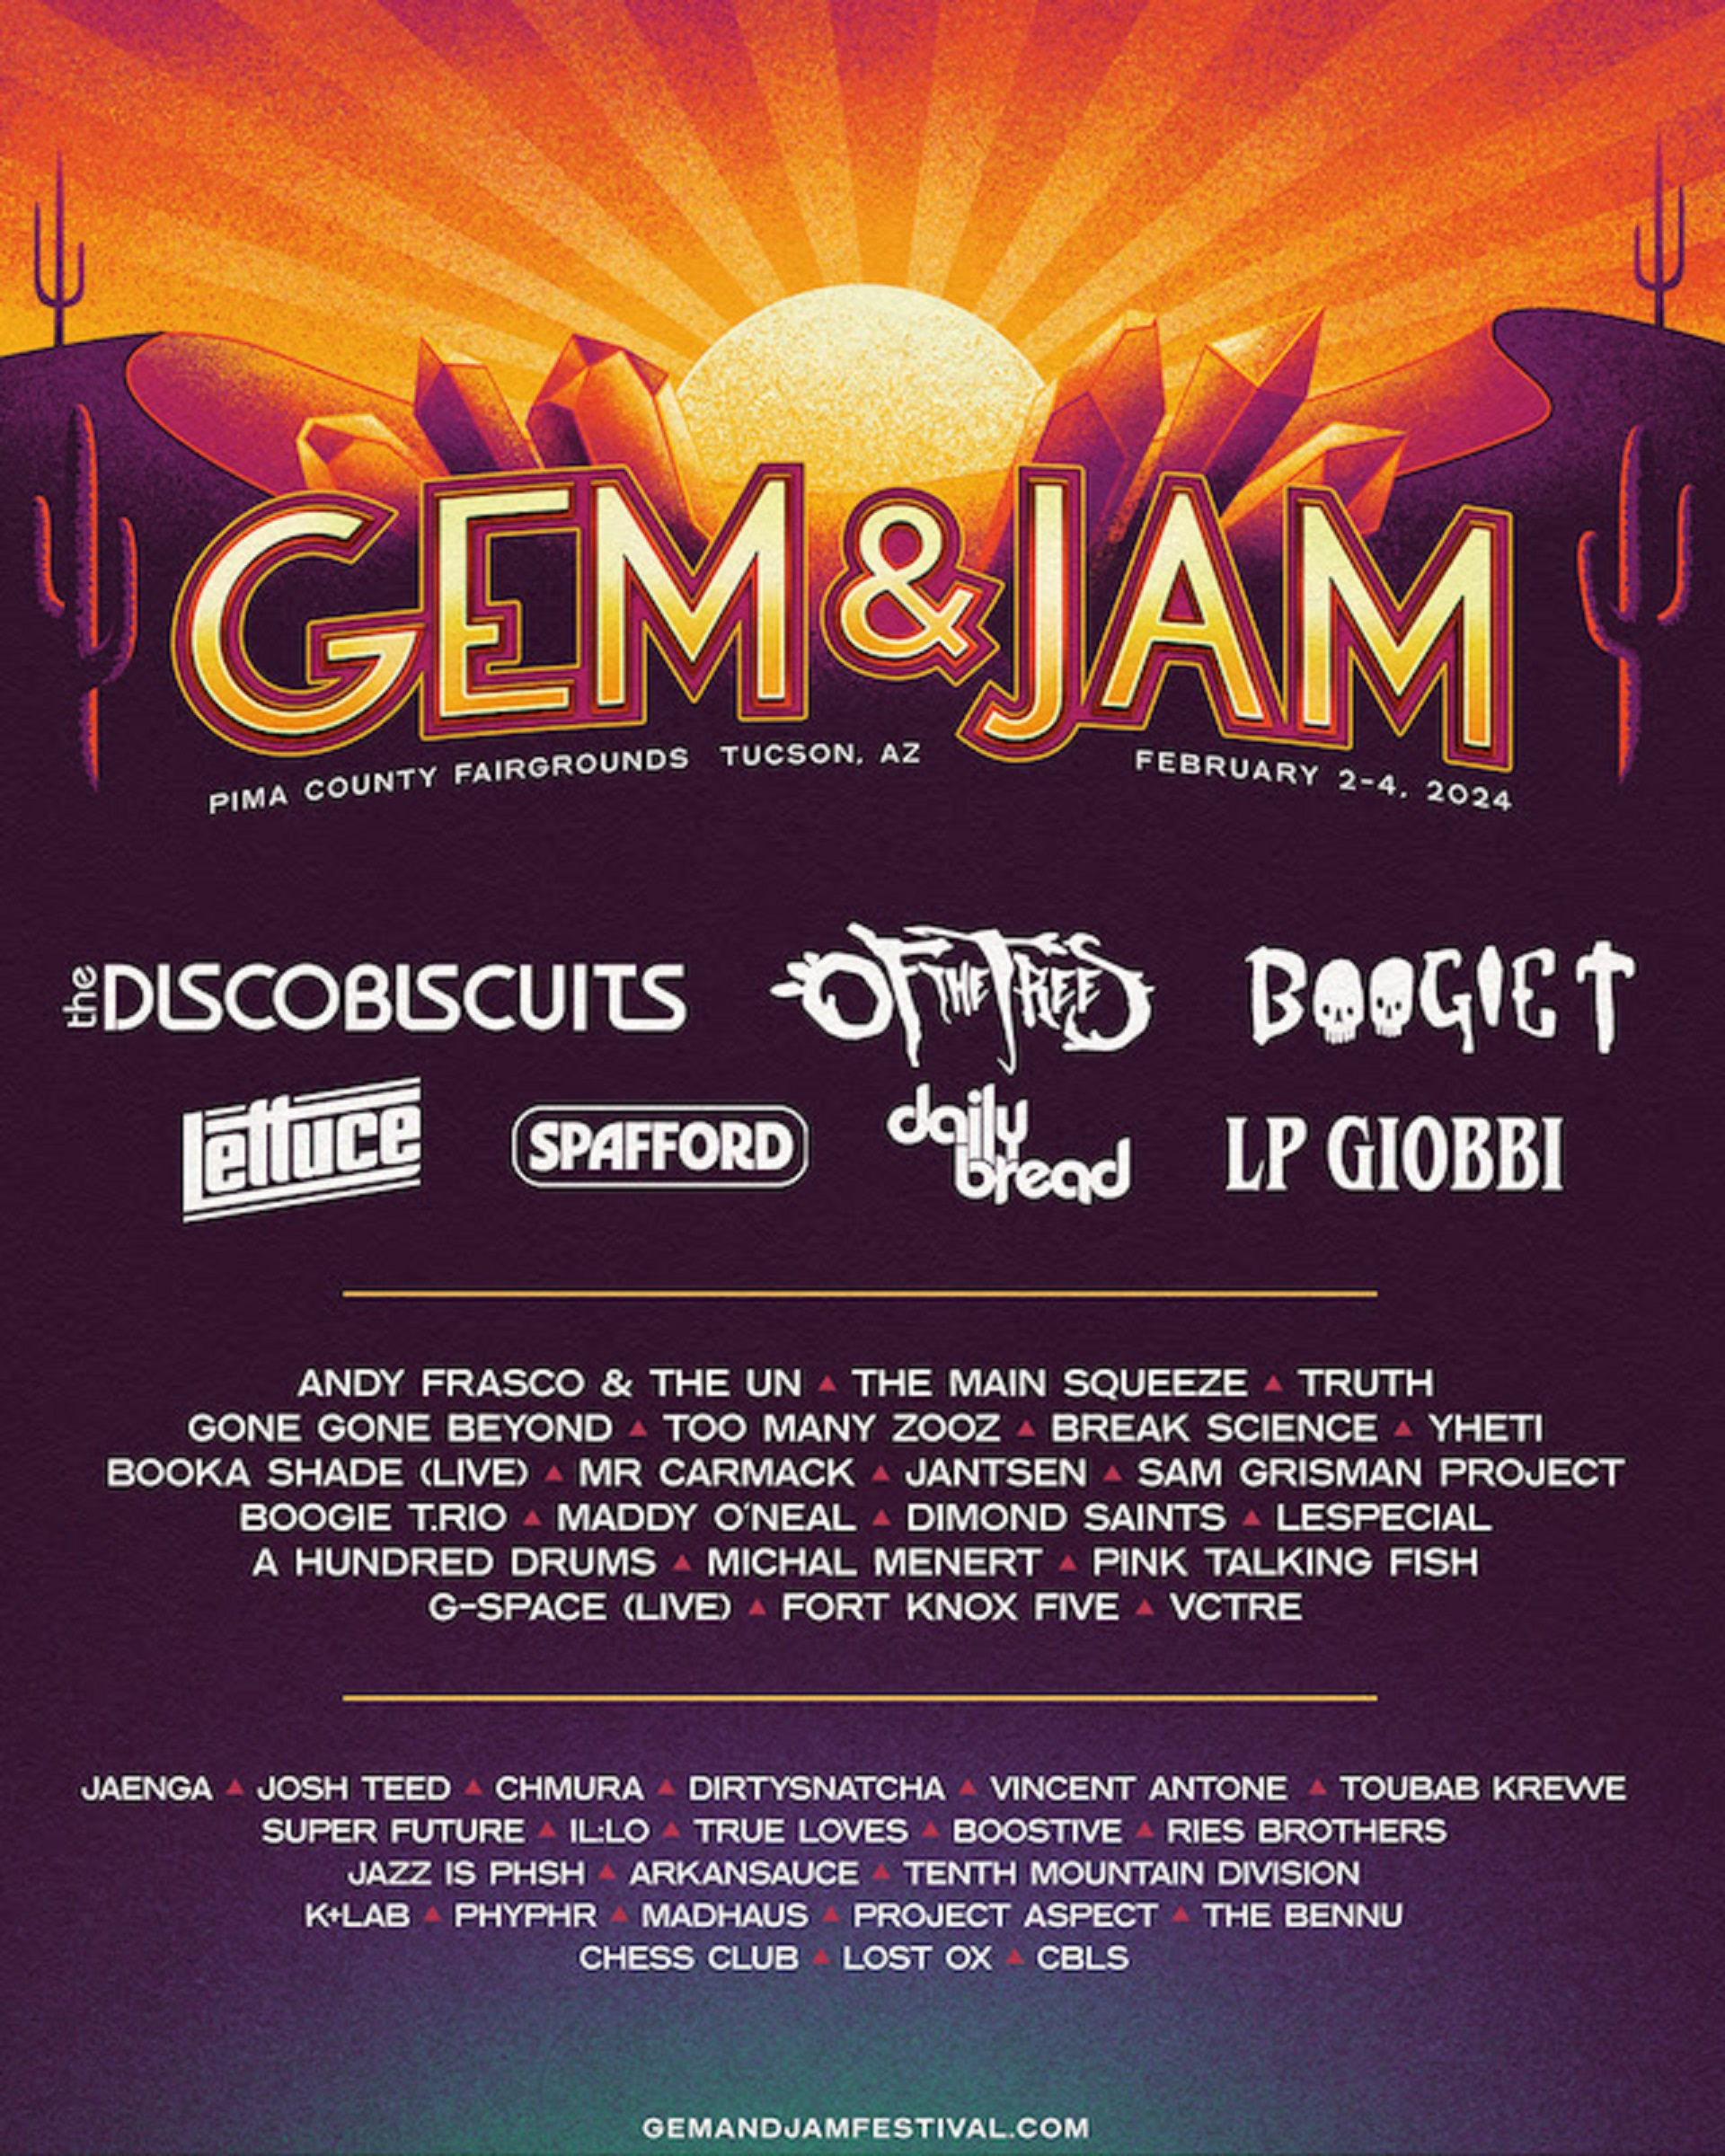 Gem & Jam unveils 2024 lineup The Disco Biscuits, Of The Trees, Boogie